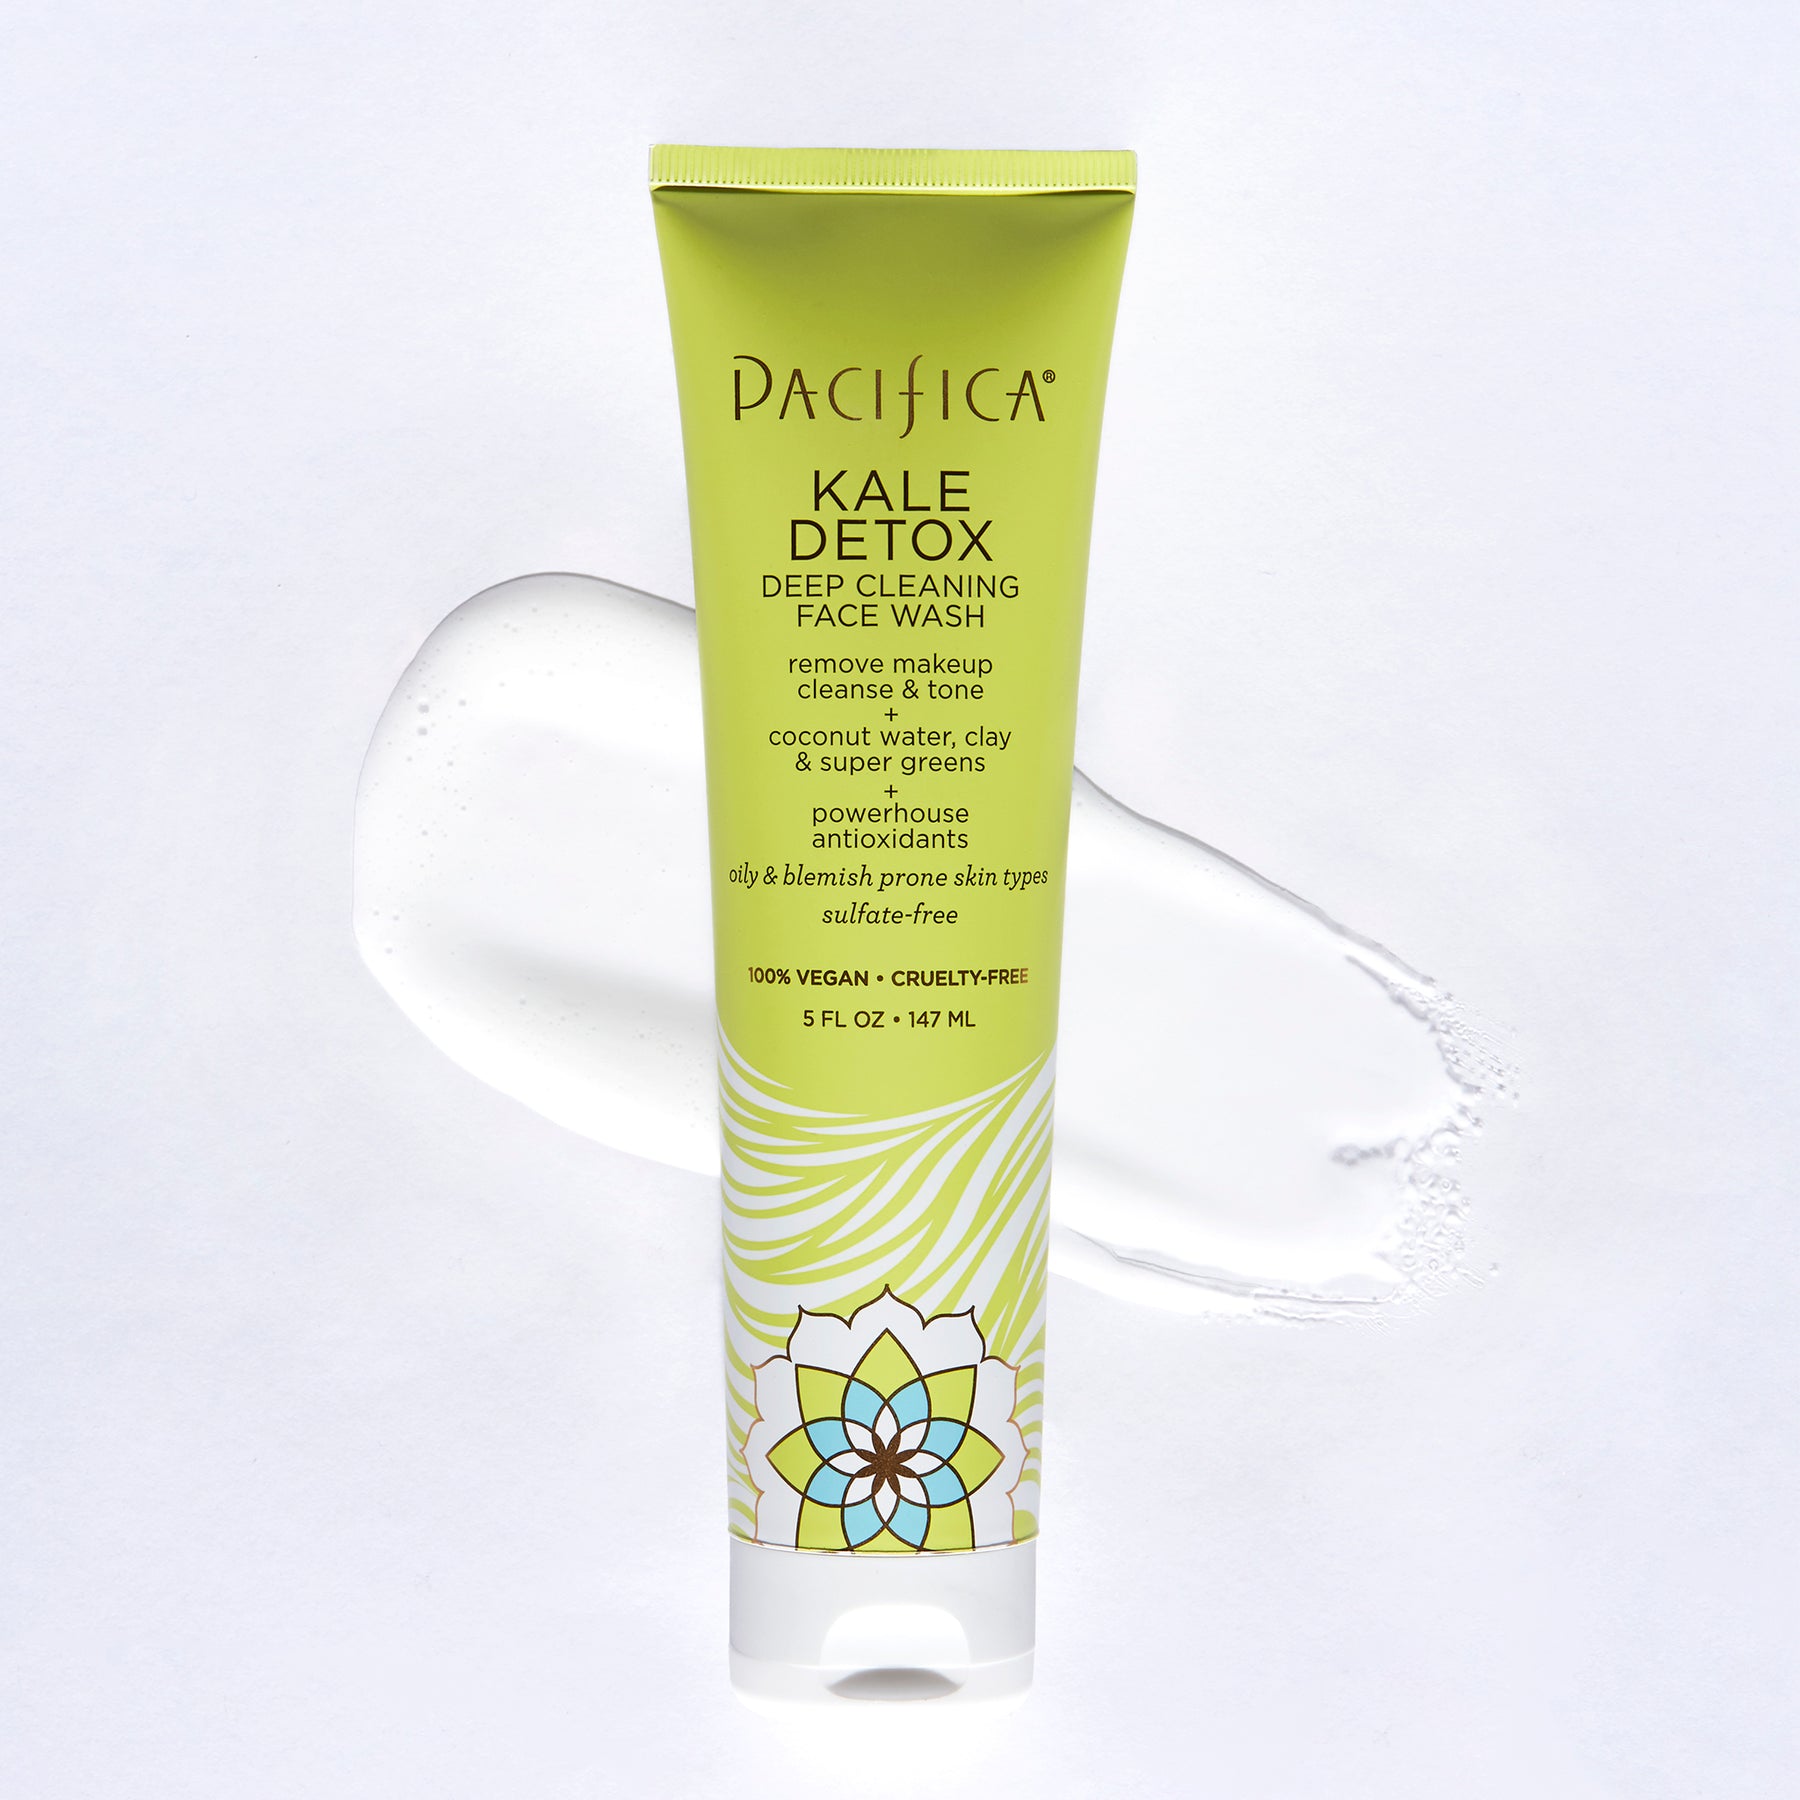 Kale Detox Deep Cleaning Face Wash - Skin Care - Pacifica Beauty